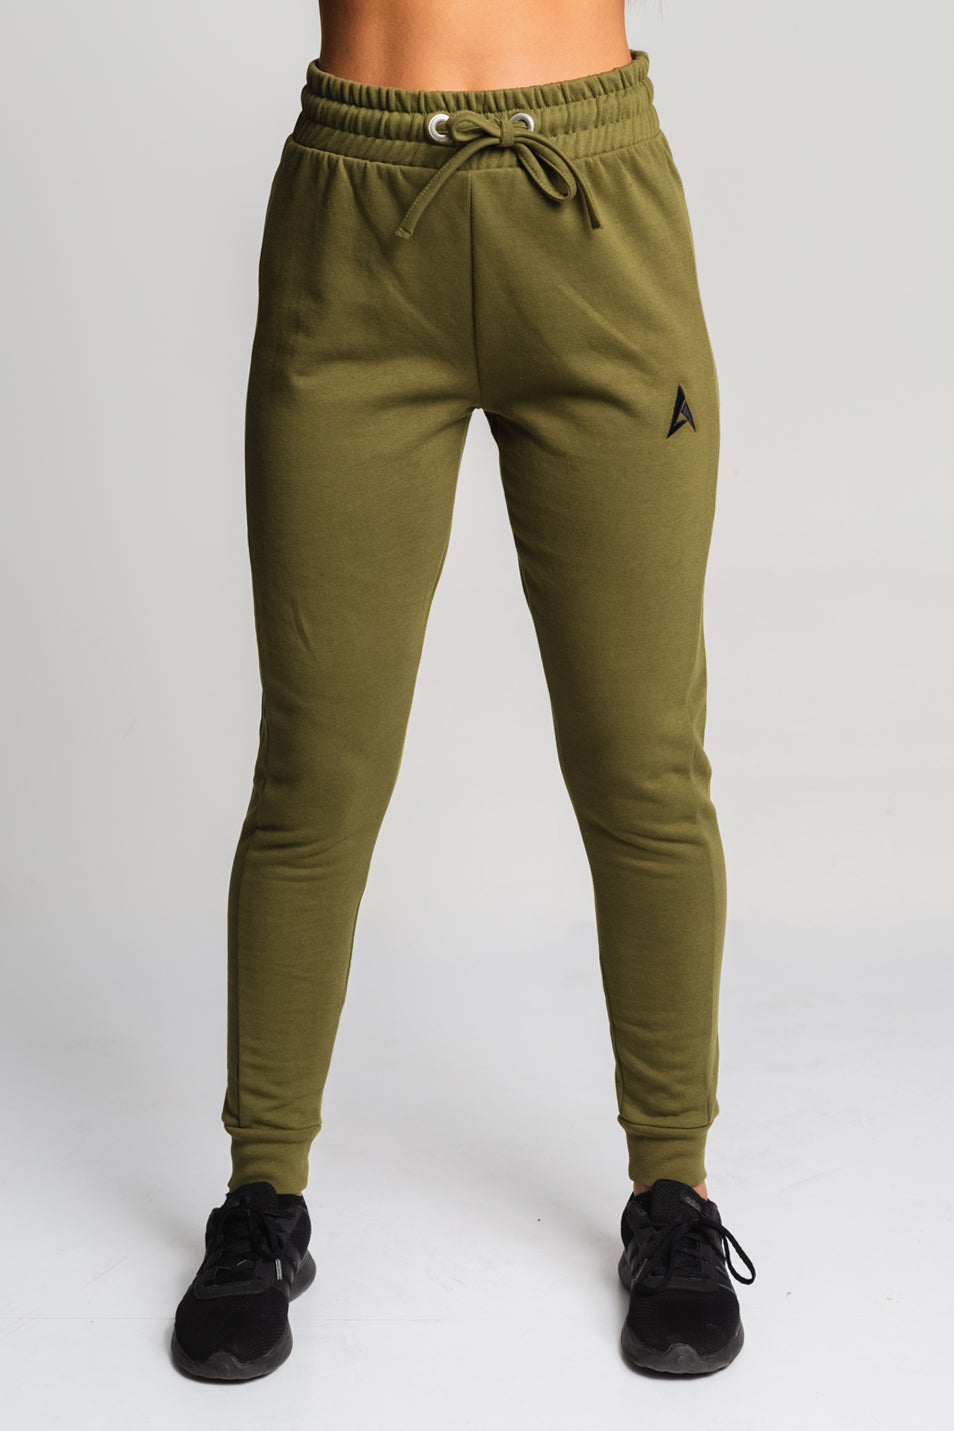 Fitted - Olive